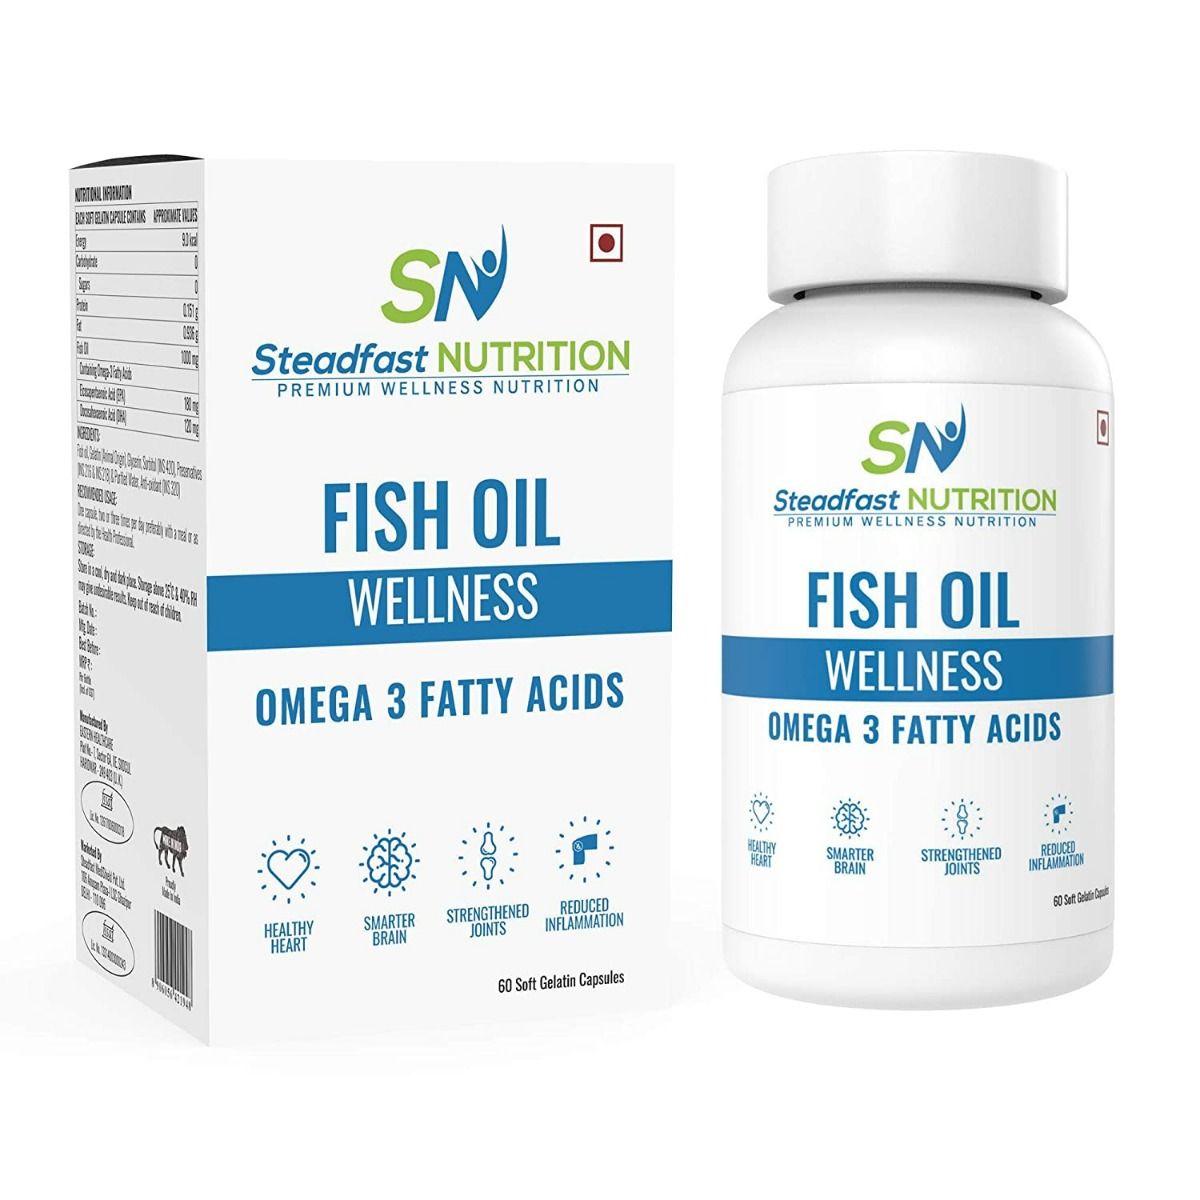 Buy Steadfast Nutrition Fish Oil Wellness Omega 3 Fatty Acids Softgel Capsule, 60 Count Online